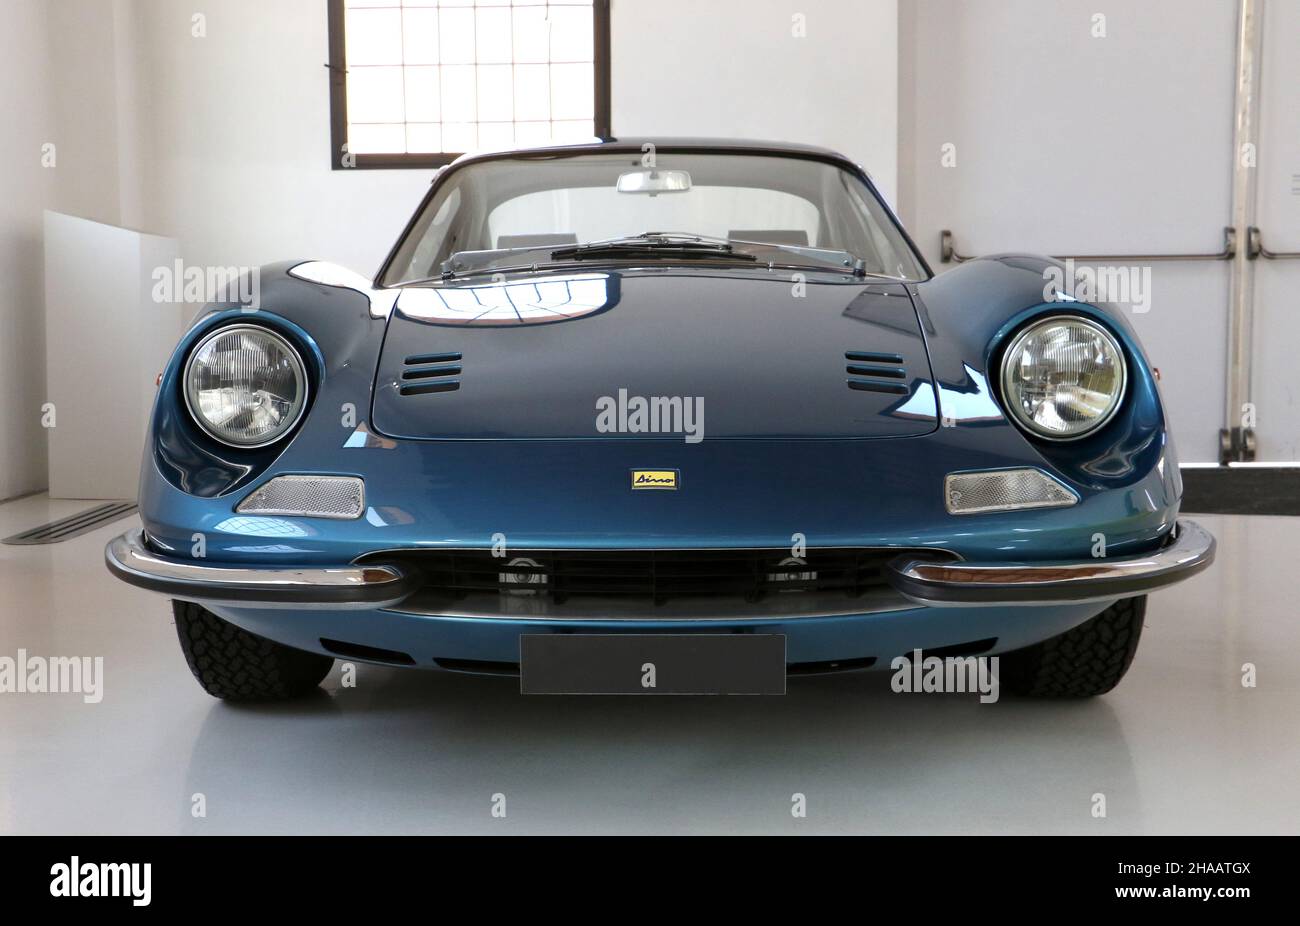 Modena, Italy, April 1, 2019, a blue 246 GT Dino on display at Enzo Ferrari museum Stock Photo